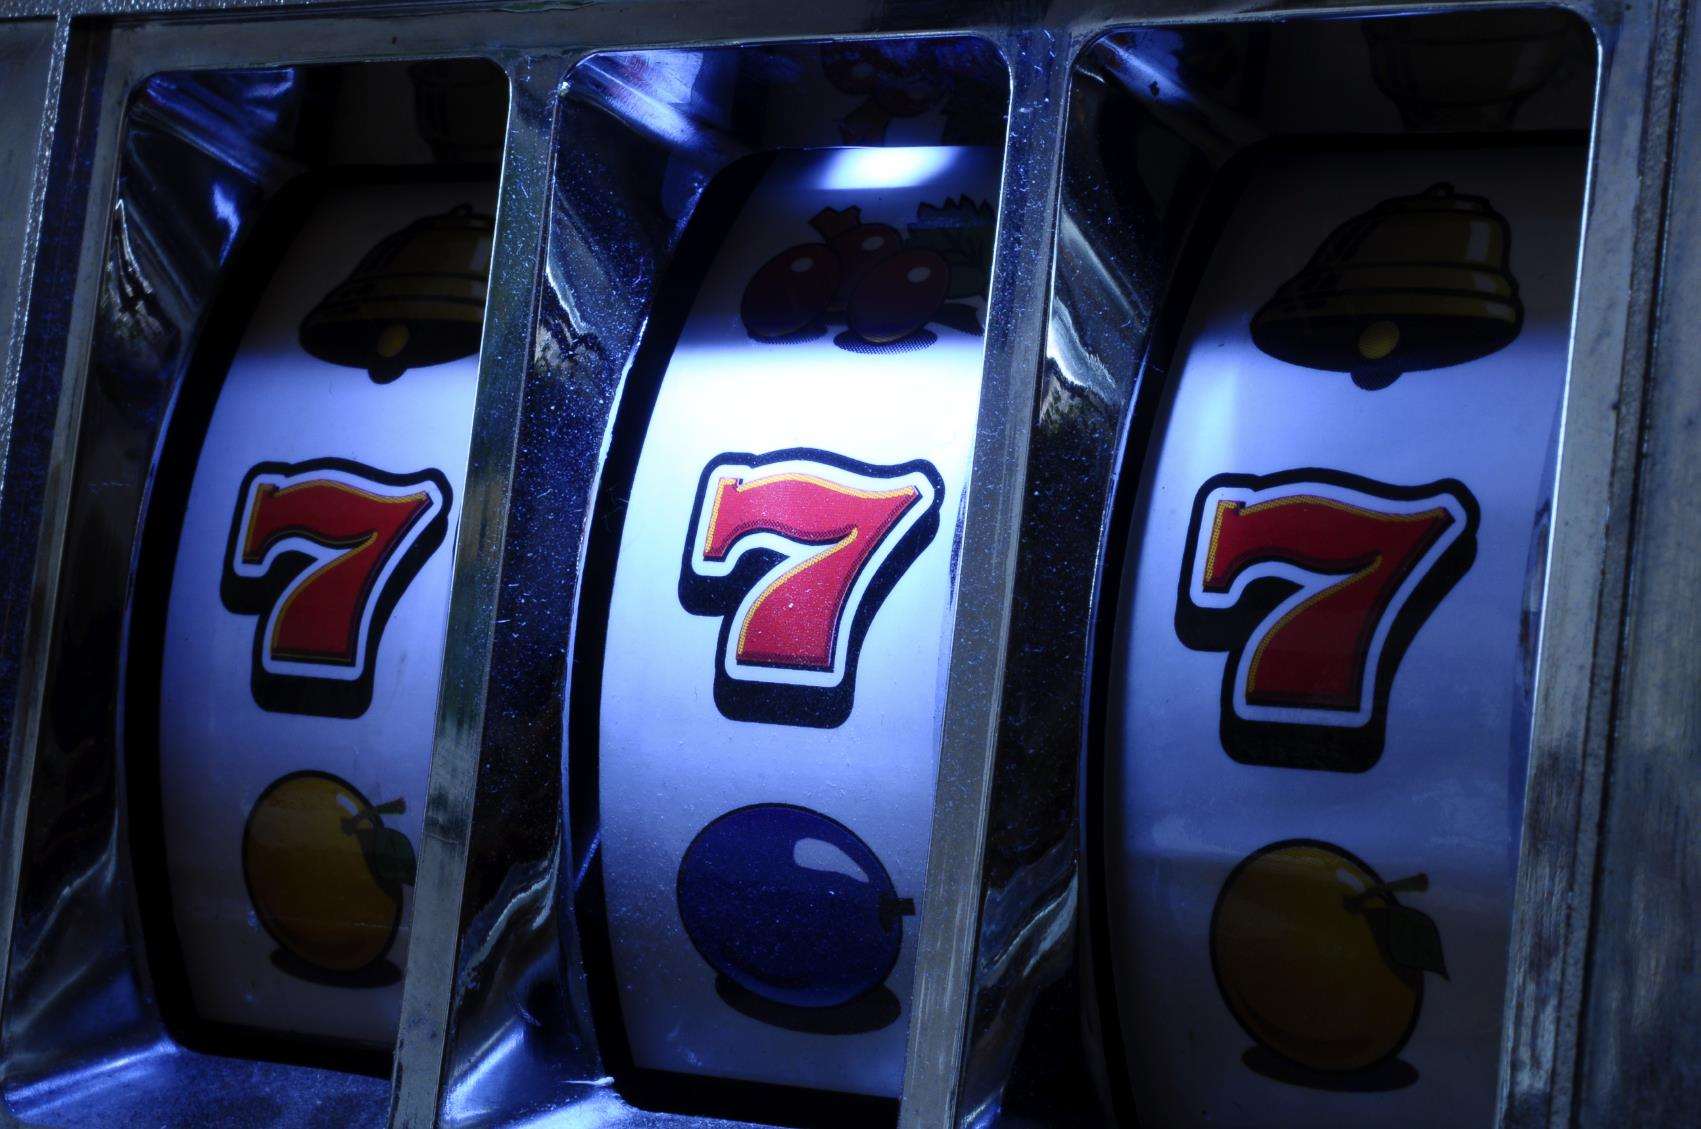 Fixed-odds betting terminals will have their maximum stakes limited to £2